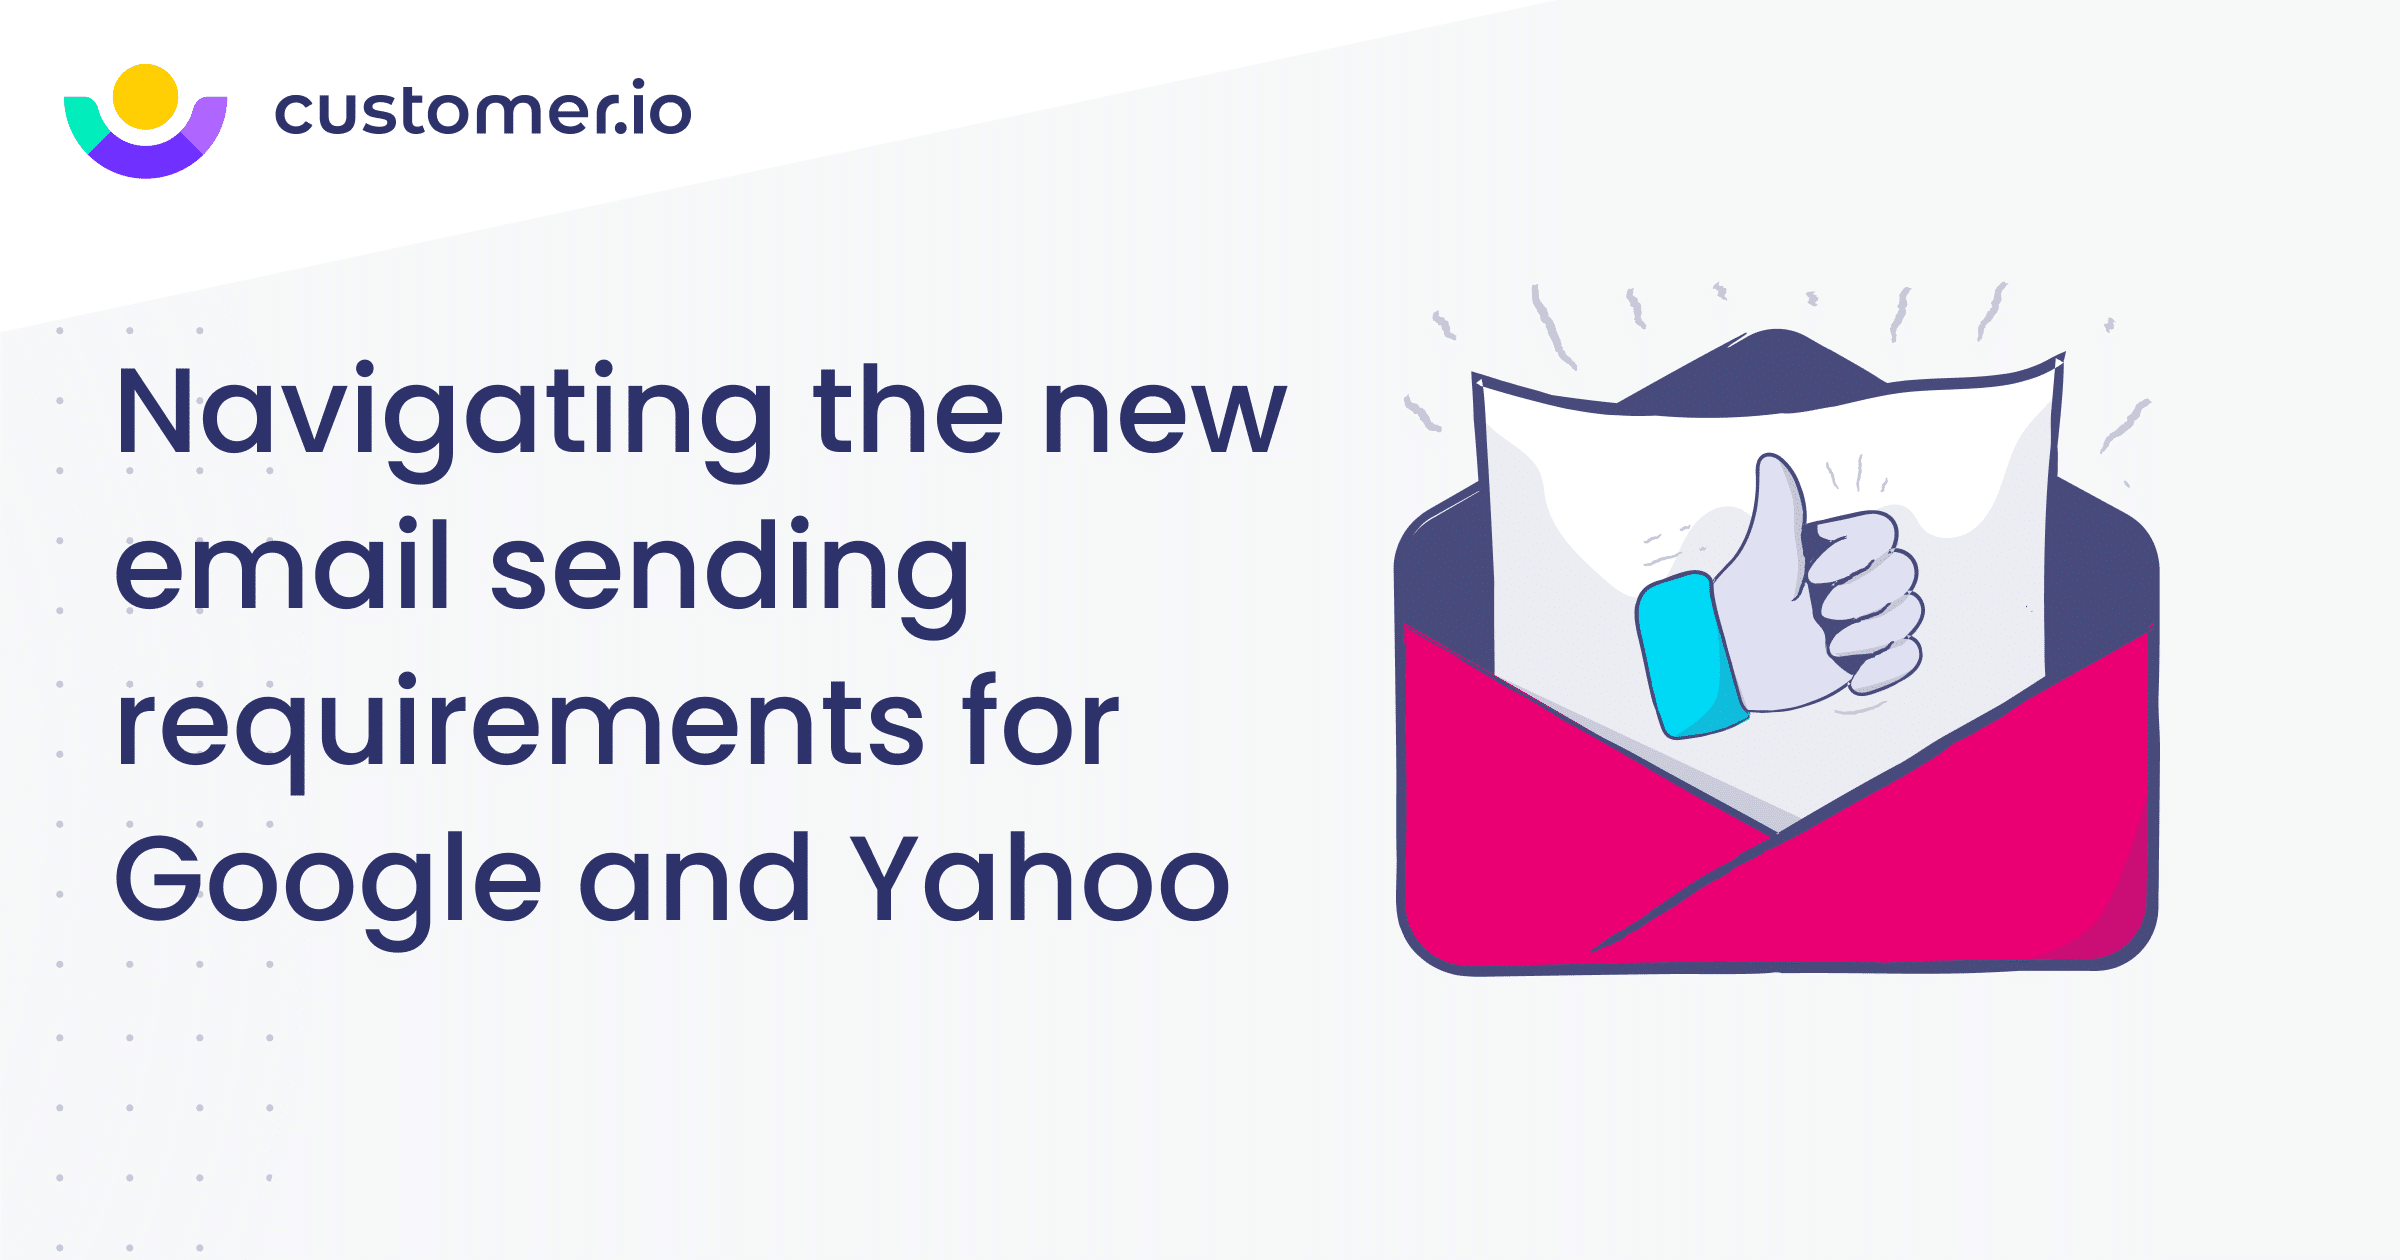 Google And Yahoo New Email Authentication